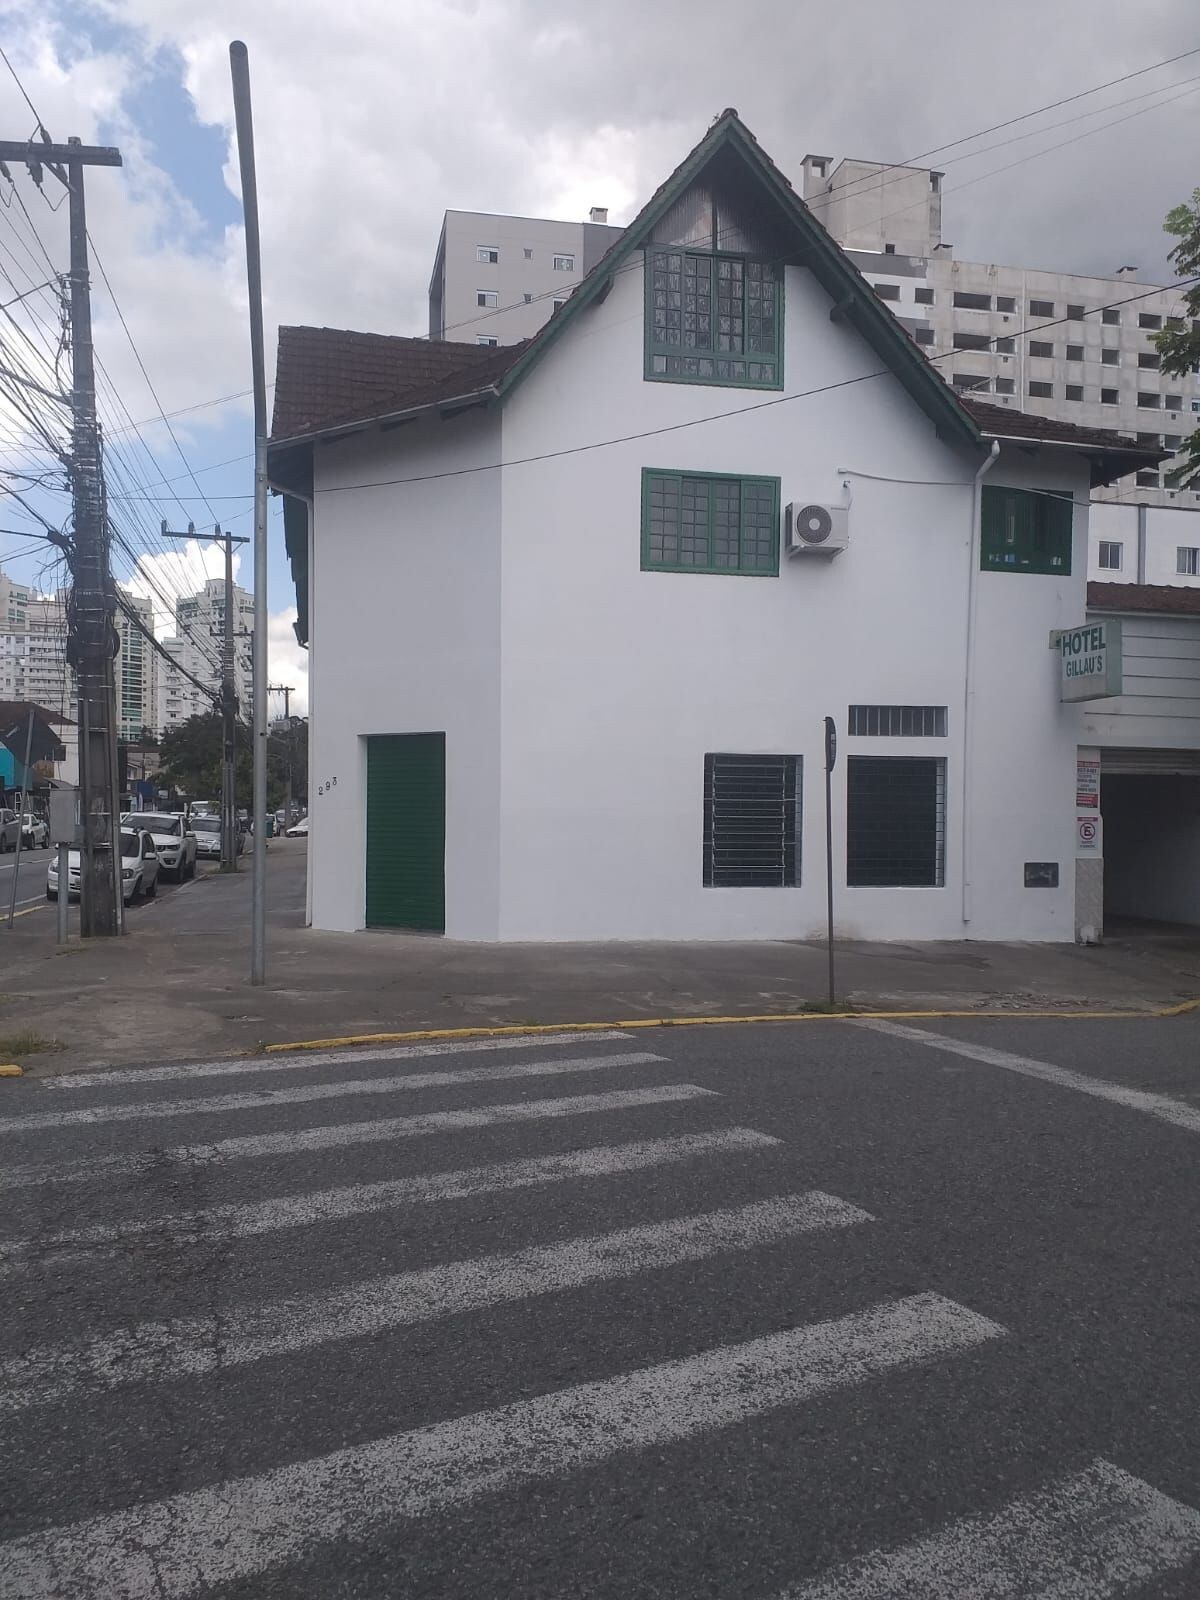 Joinville舞蹈节酒店